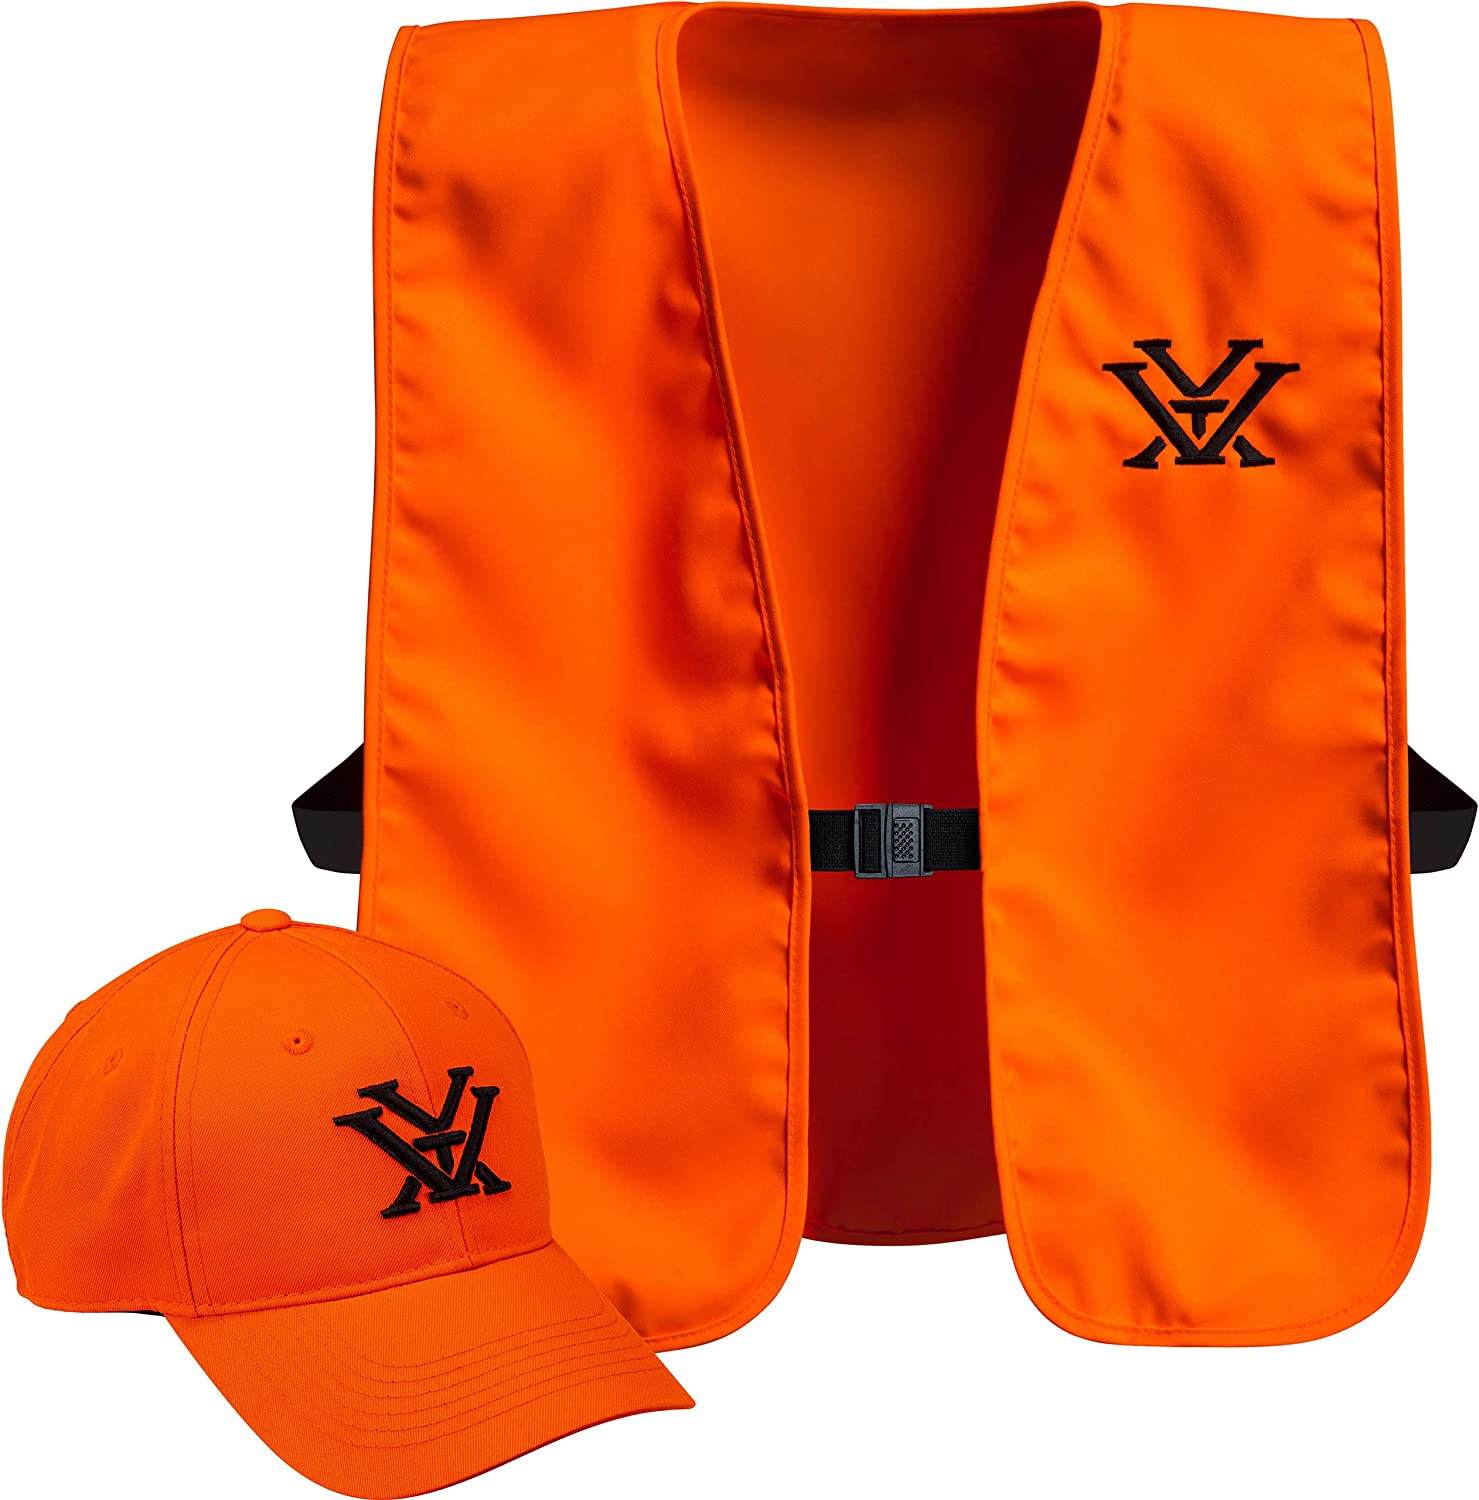  Suhine 6 Pack Blaze Orange Hunting Vest and Reversible Hat Set  3 Blaze Orange Hunting Vest 3 Camo and Blaze Orange Hunting Reversible Hat  for Men Outdoor Sports, Fishing, Outdoor Hunting